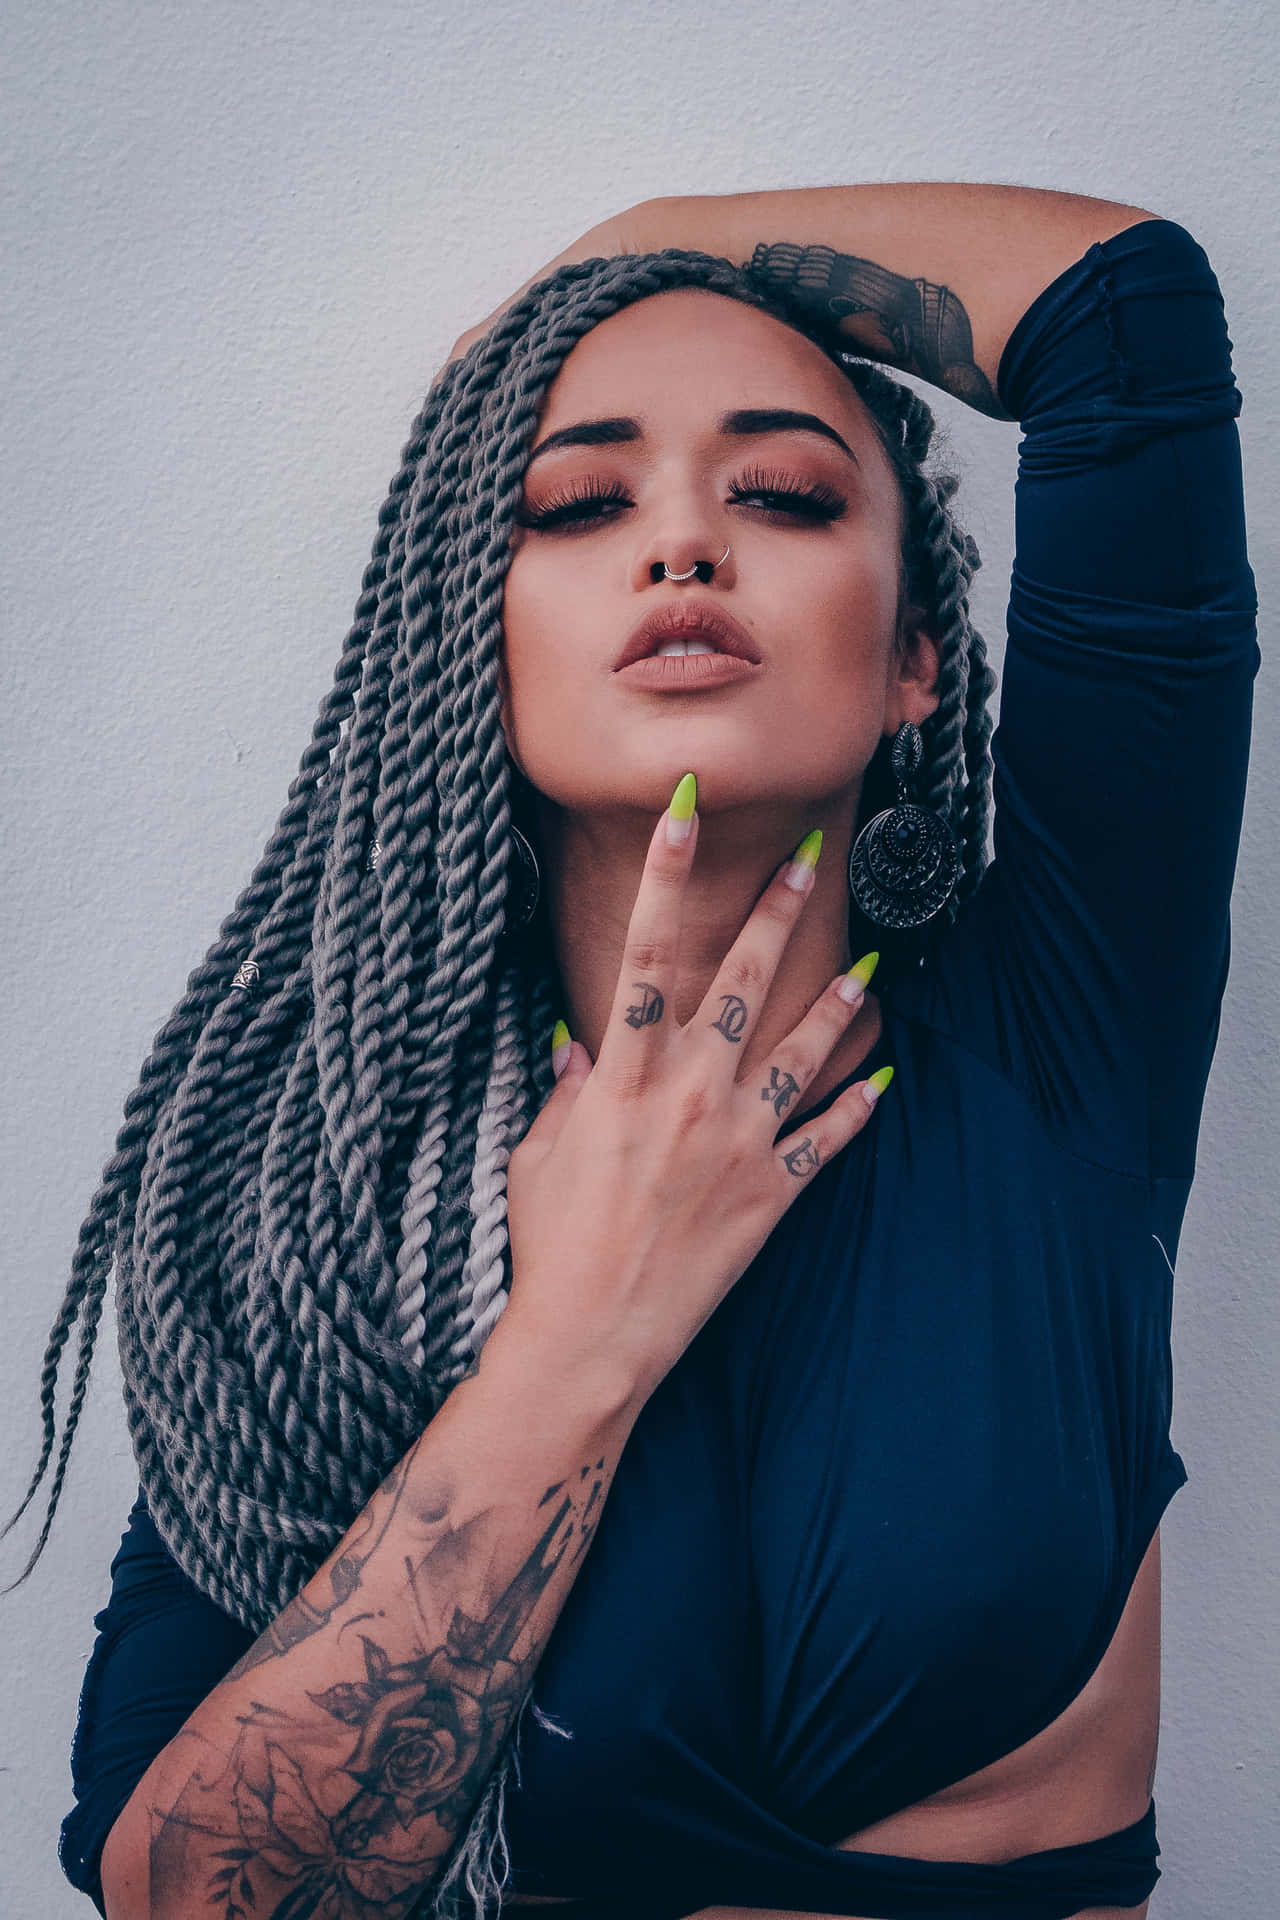 A Woman With Dreadlocks And A Tattoo On Her Arm